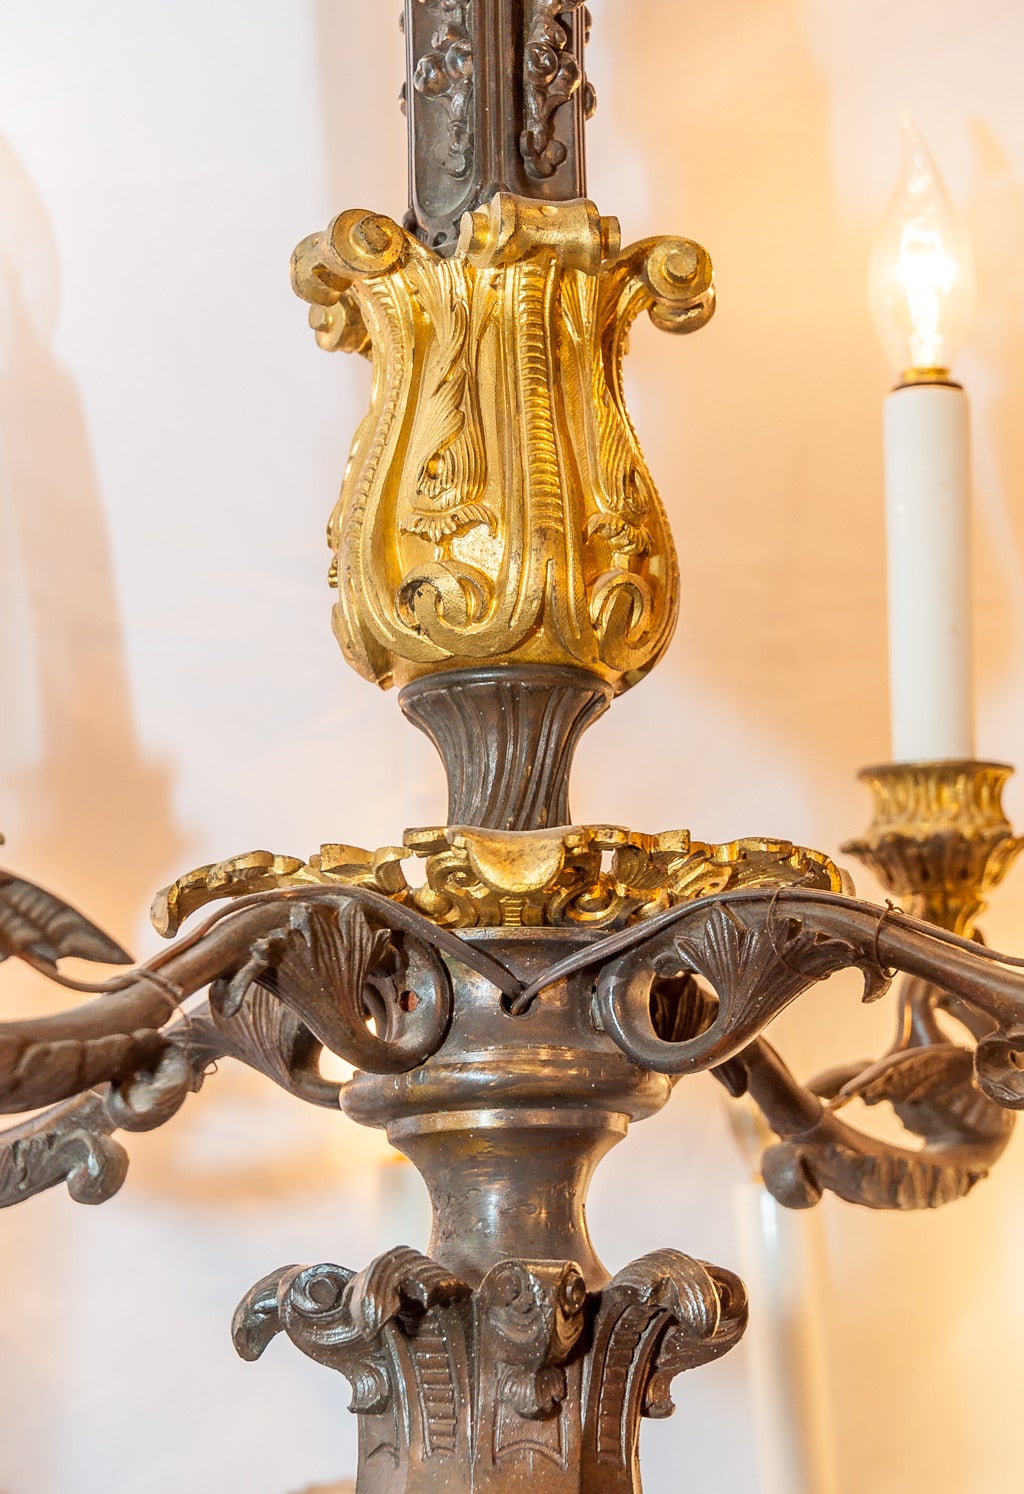 A 19th century French two-toned bronze Louis XIV style nineteen-light chandelier.
Stock number: L160